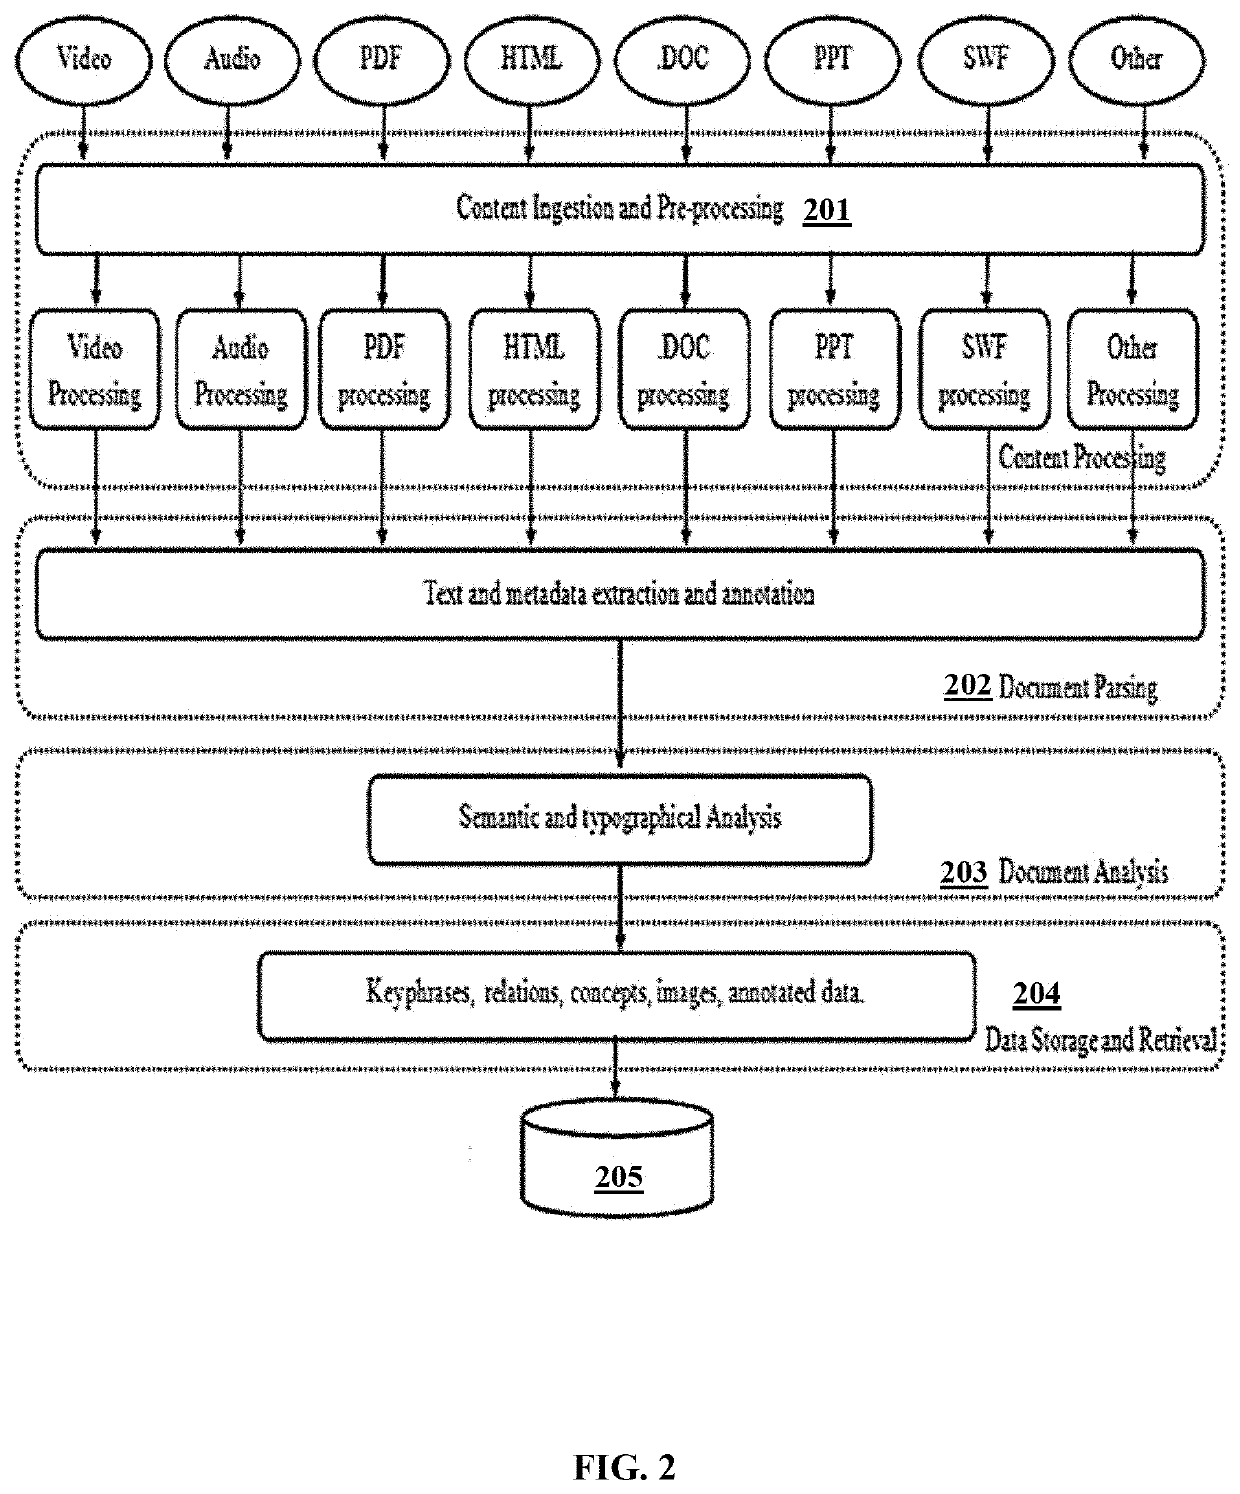 System and method for providing an interactive visual learning environment for creation, presentation, sharing, organizing and analysis of knowledge on subject matter